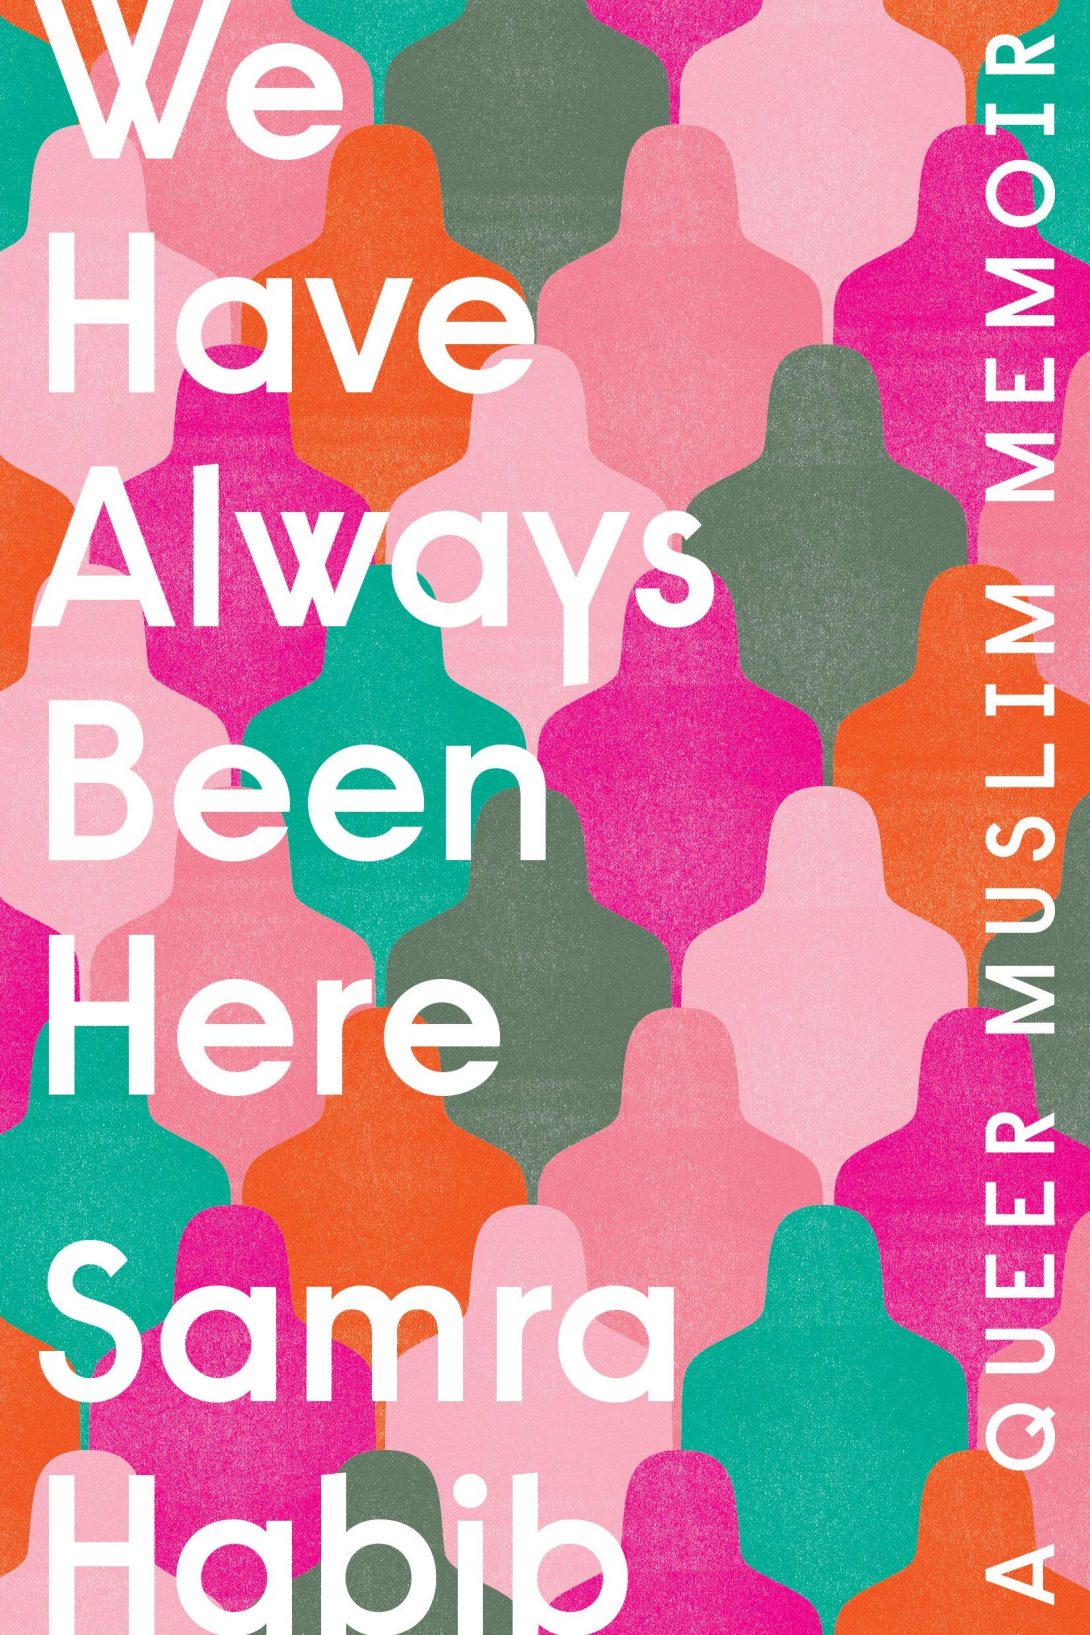 We Have Always Been Here book cover, with text of title and author name set against a pink colorful patterned background